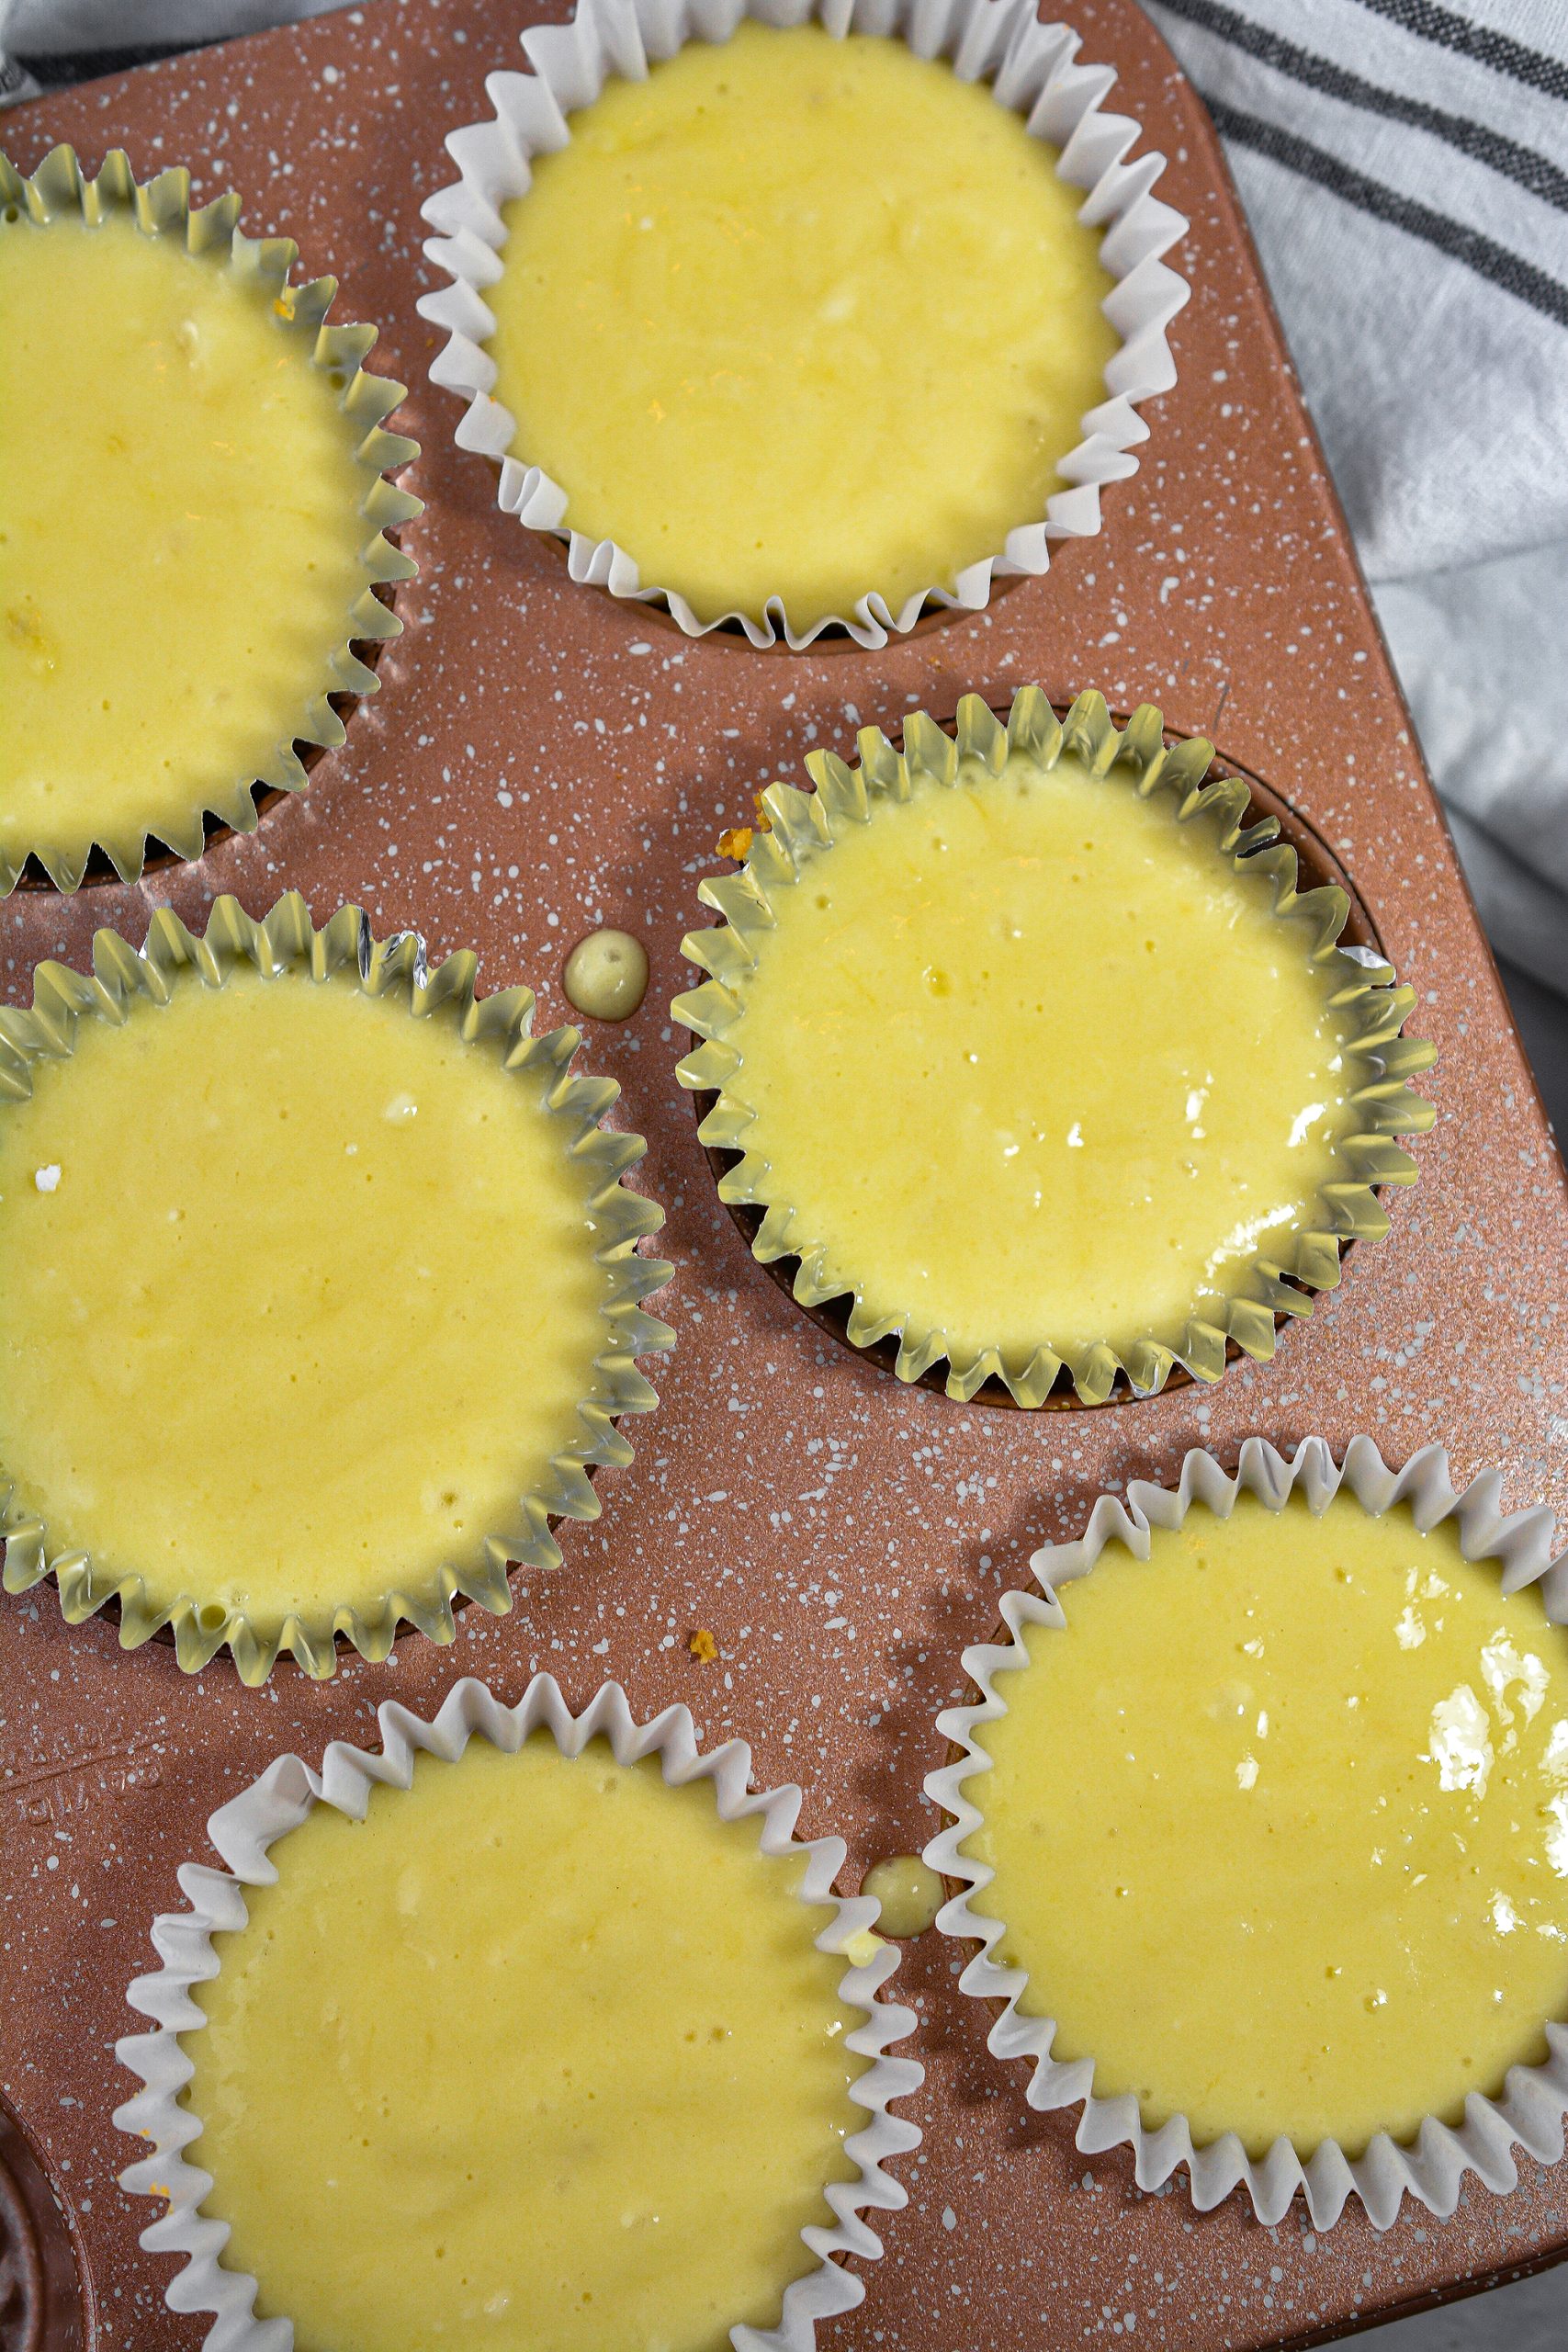 Fill the sections of the muffin tin almost to the top with the cupcake batter. Bake for 20-25 minutes until cooked through. Let cool. 